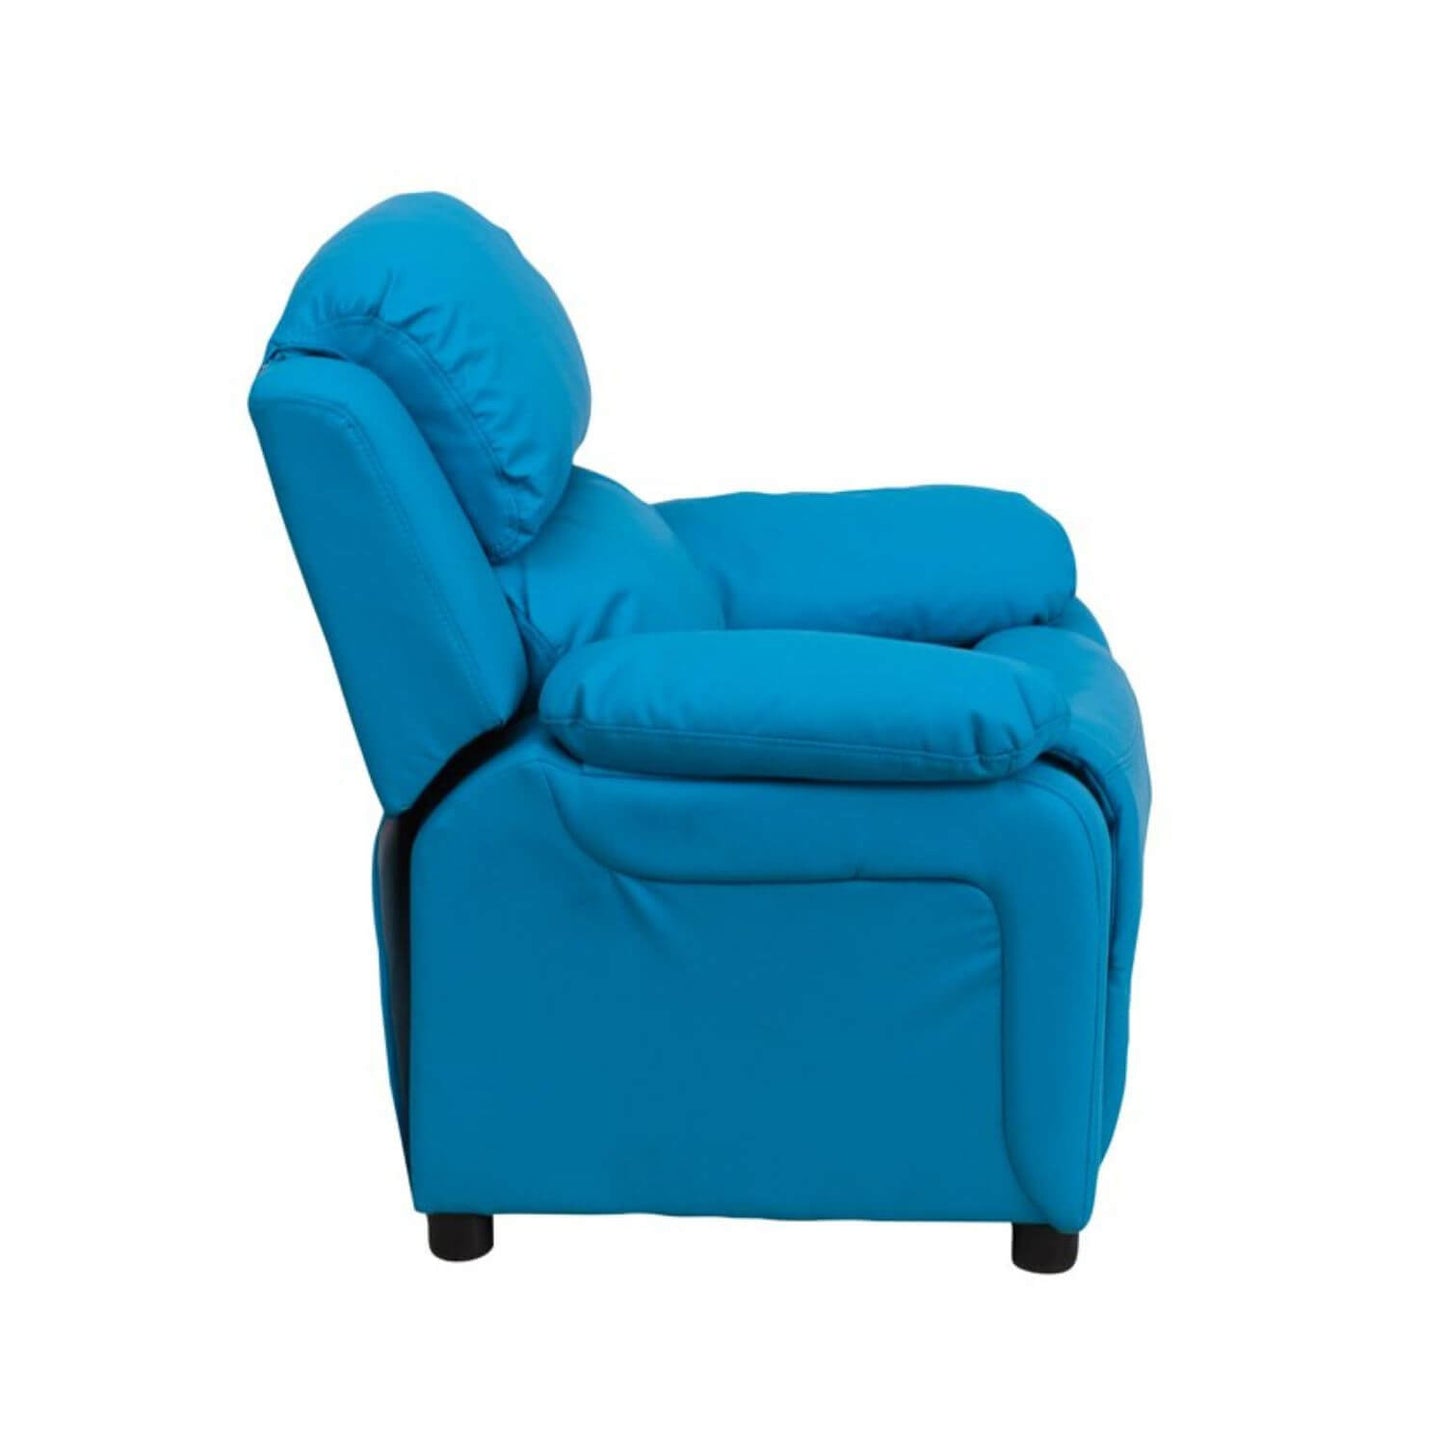 Flash Furniture Deluxe Contemporary Turquoise Vinyl Kids Recliner with Arms